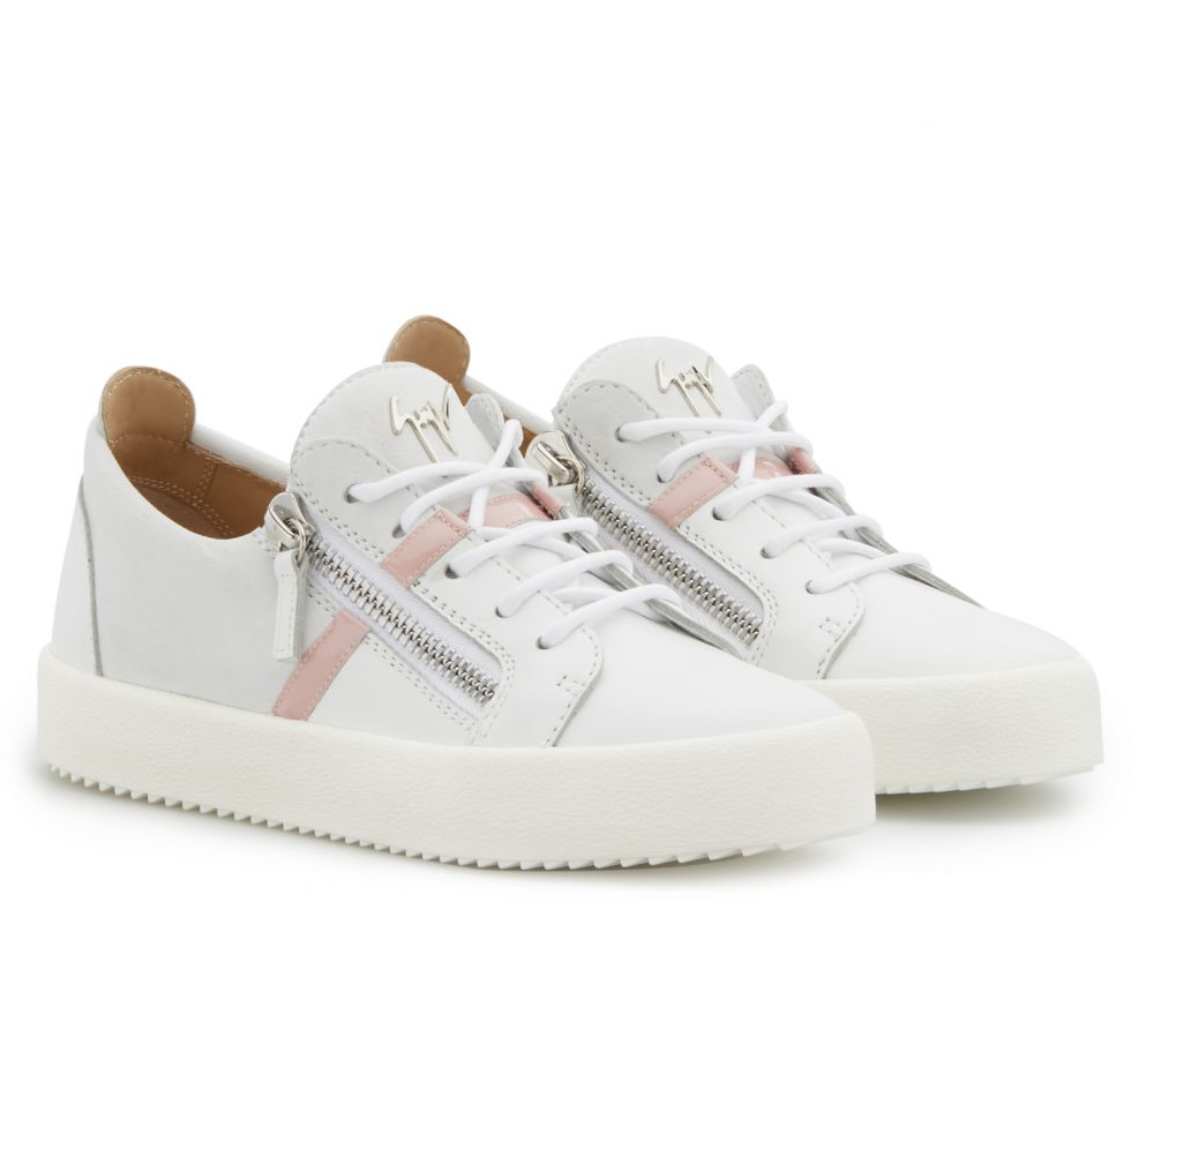 Giuseppe Zanotti Low Top Sneakers - a premium product for high achievers